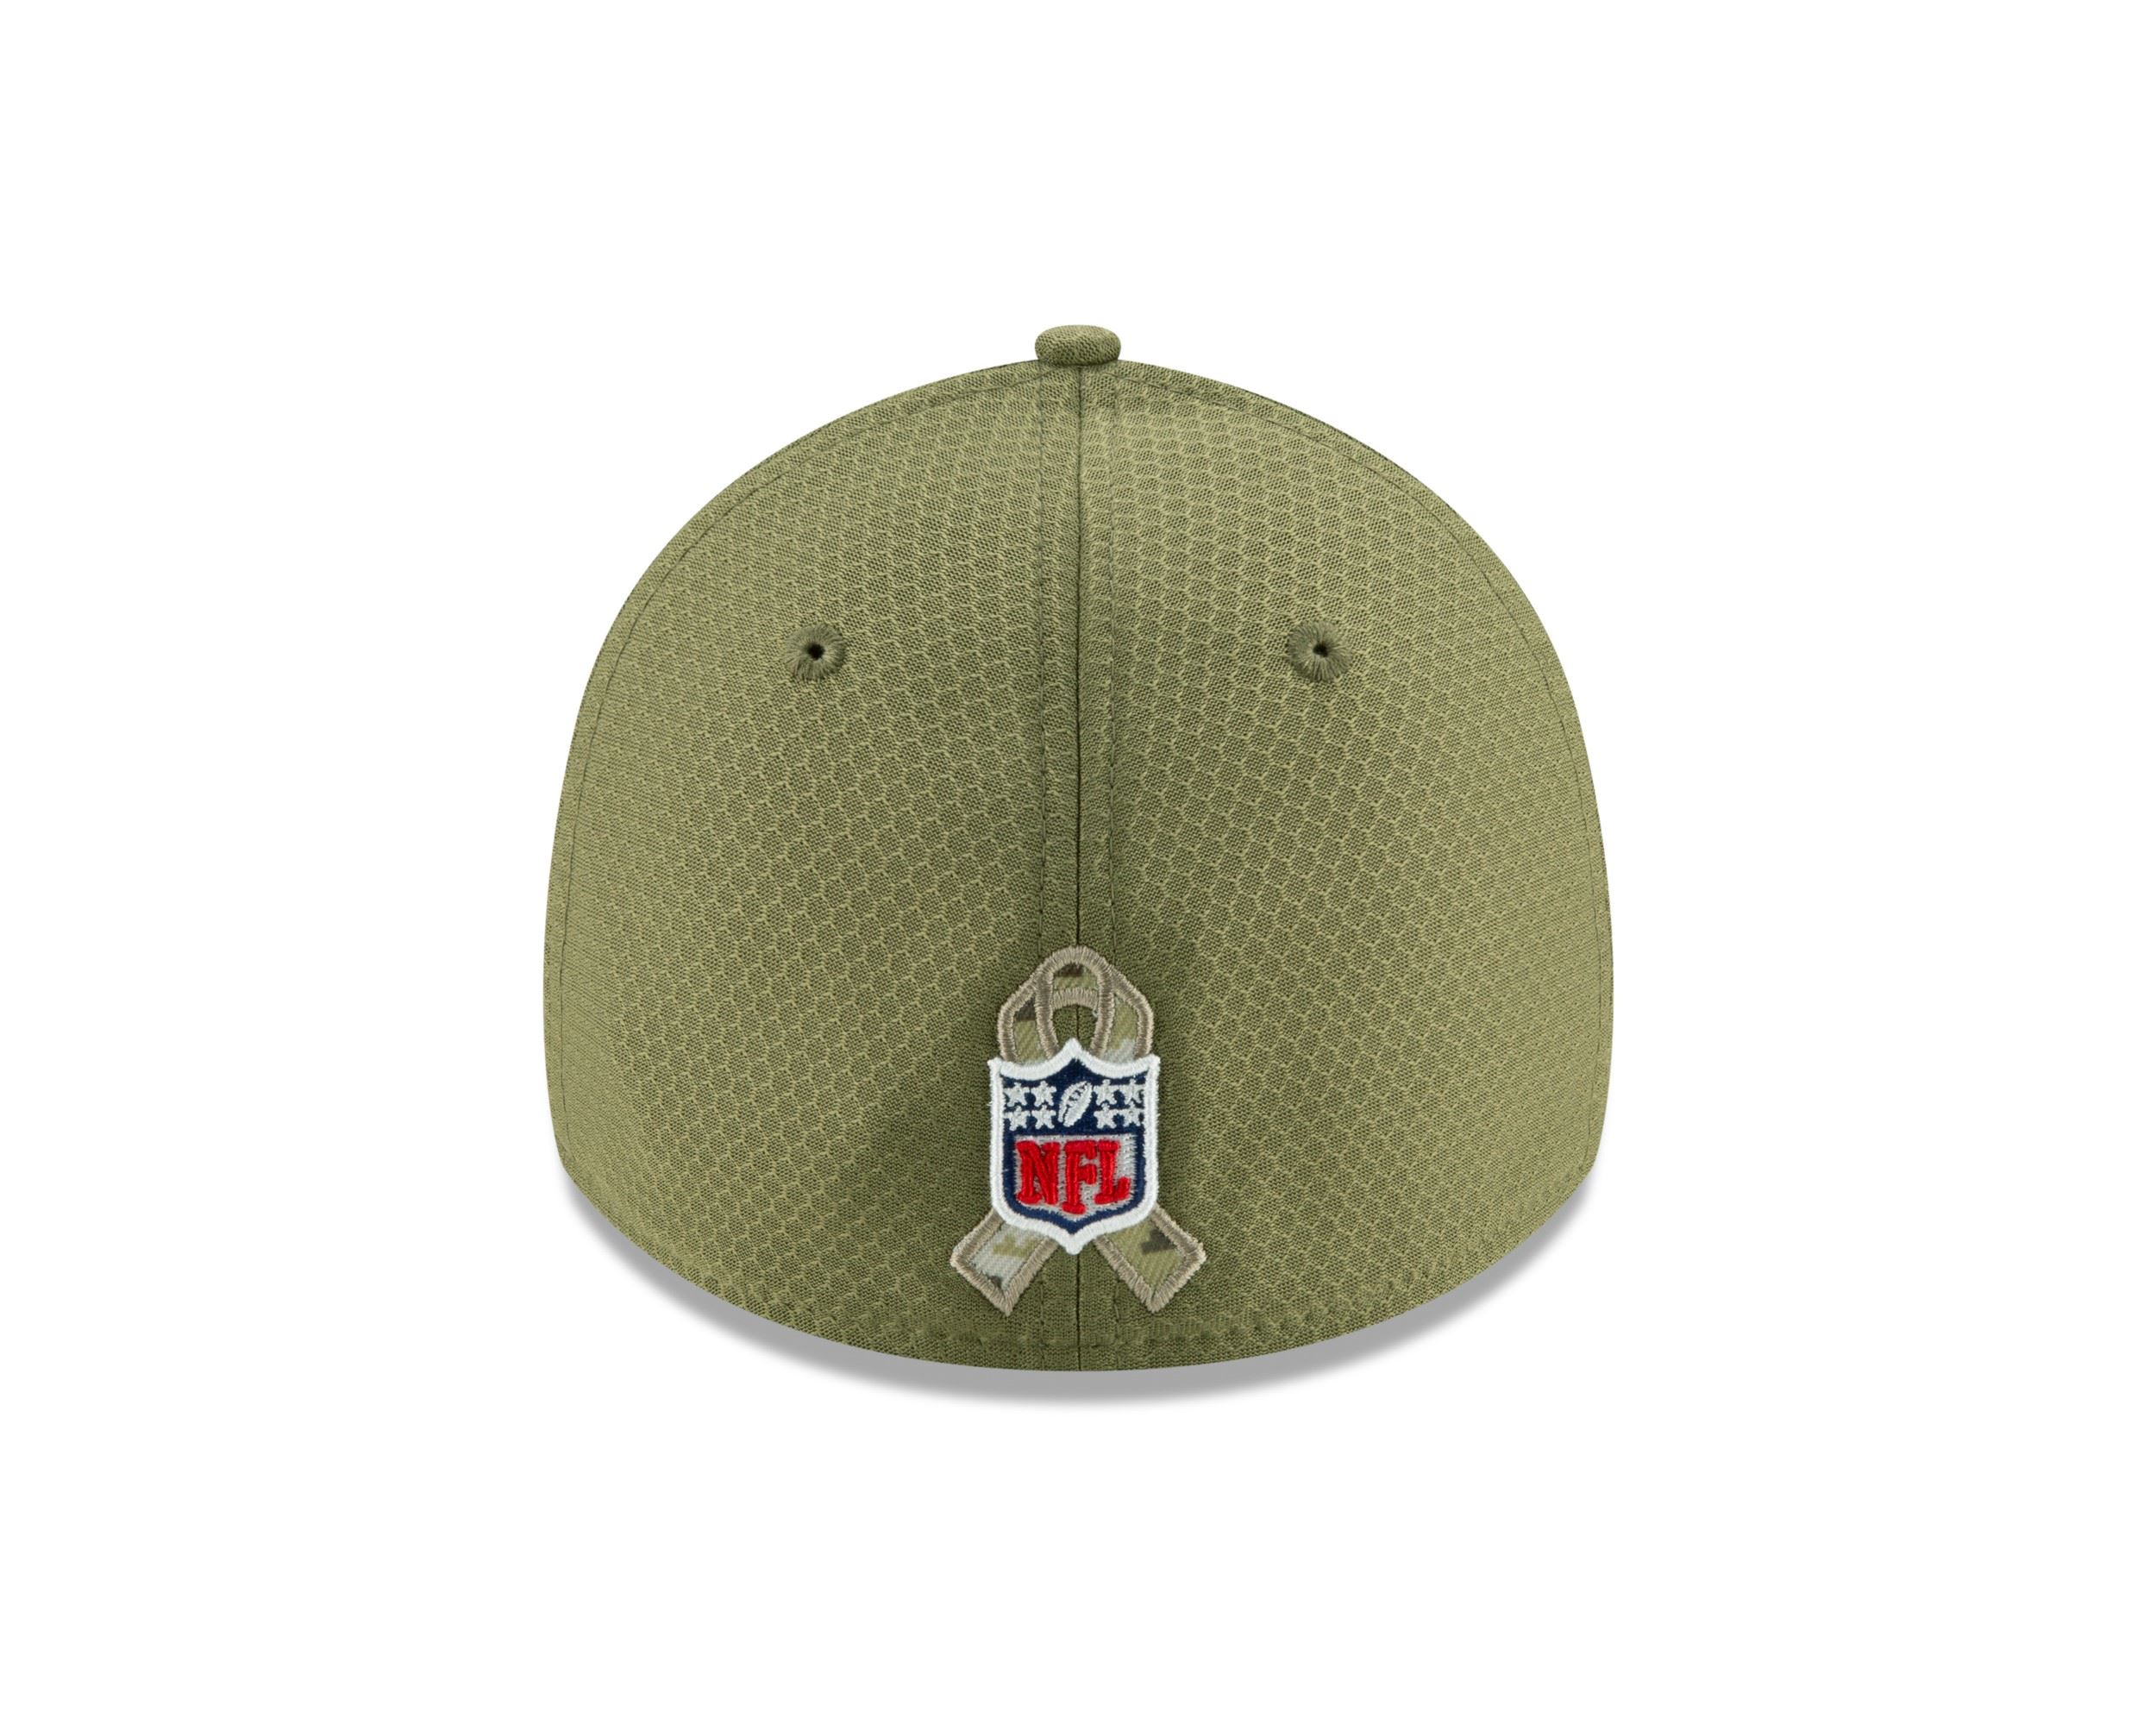 Seattle Seahawks On Field 2019 Salute to Service Olive 39Thirty Cap New Era